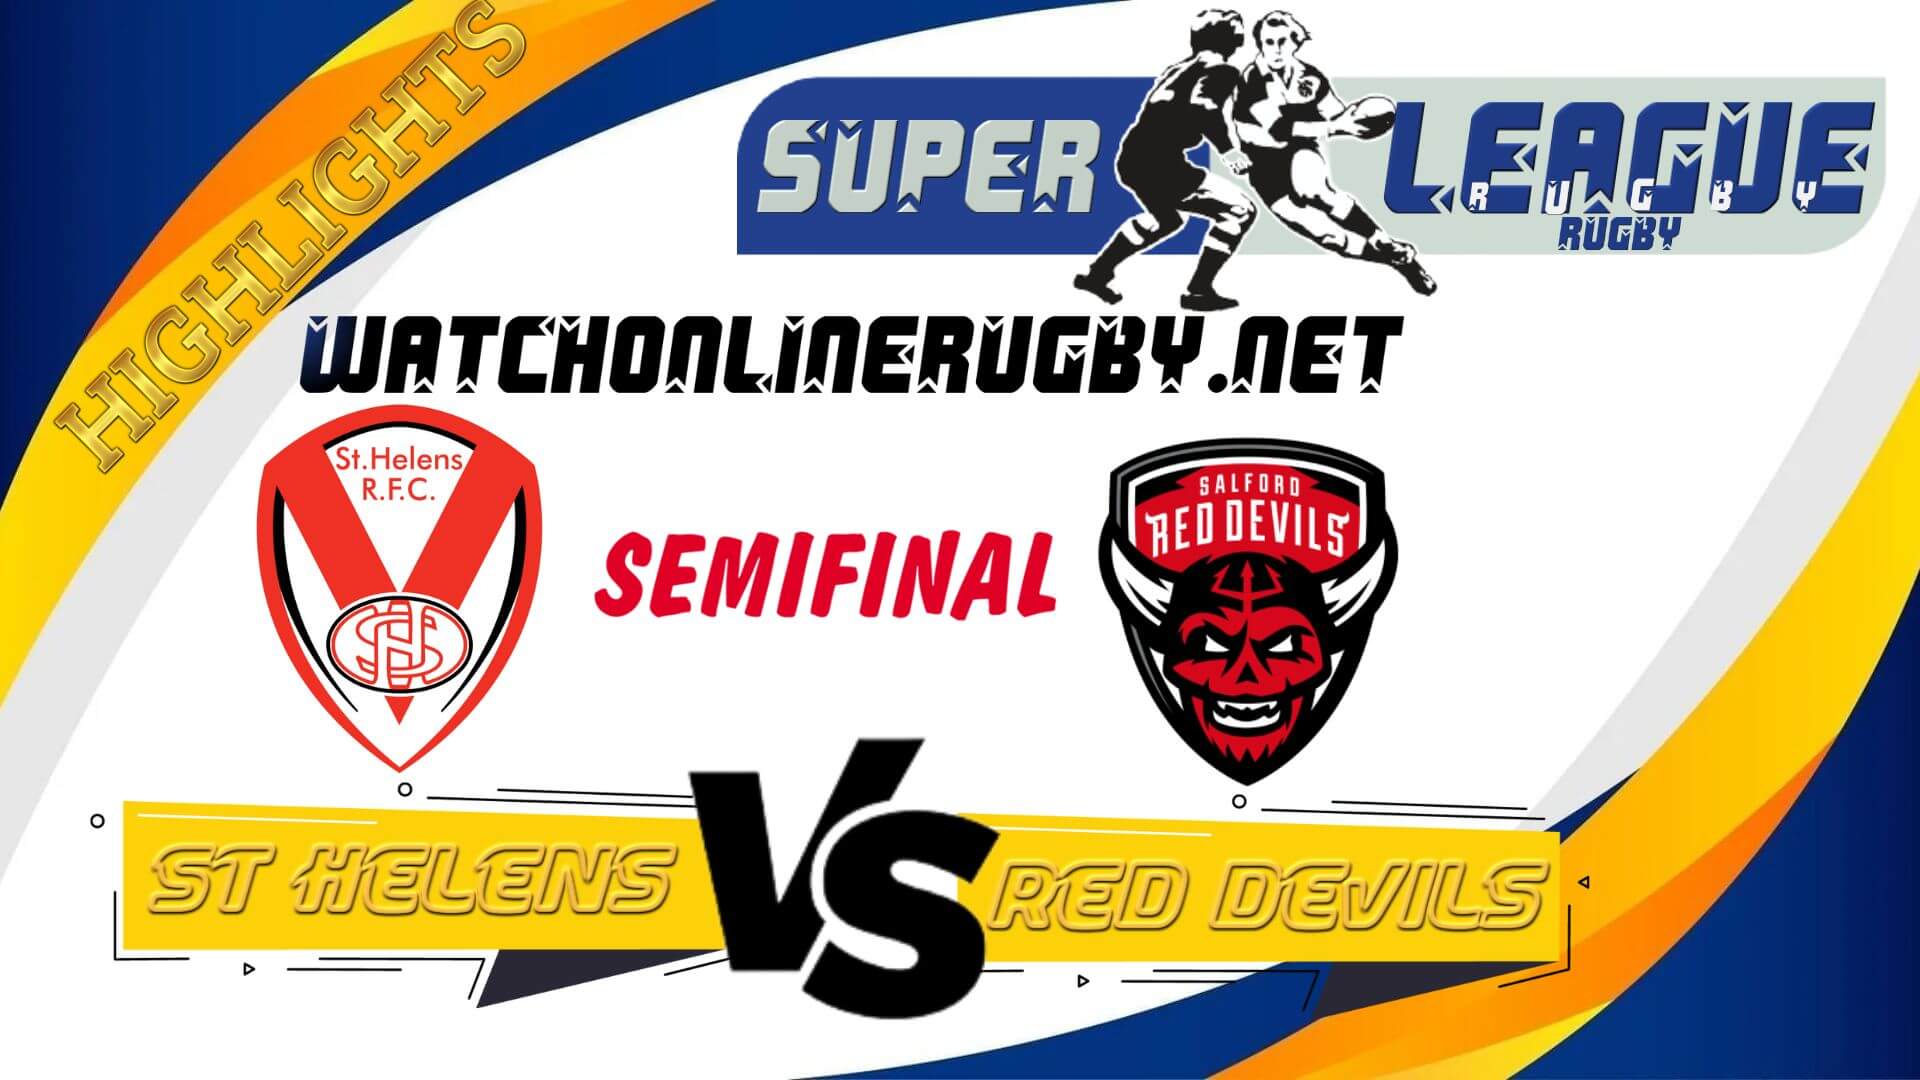 St Helens Vs Salford Red Devils Super League Rugby 2022 Semi Final